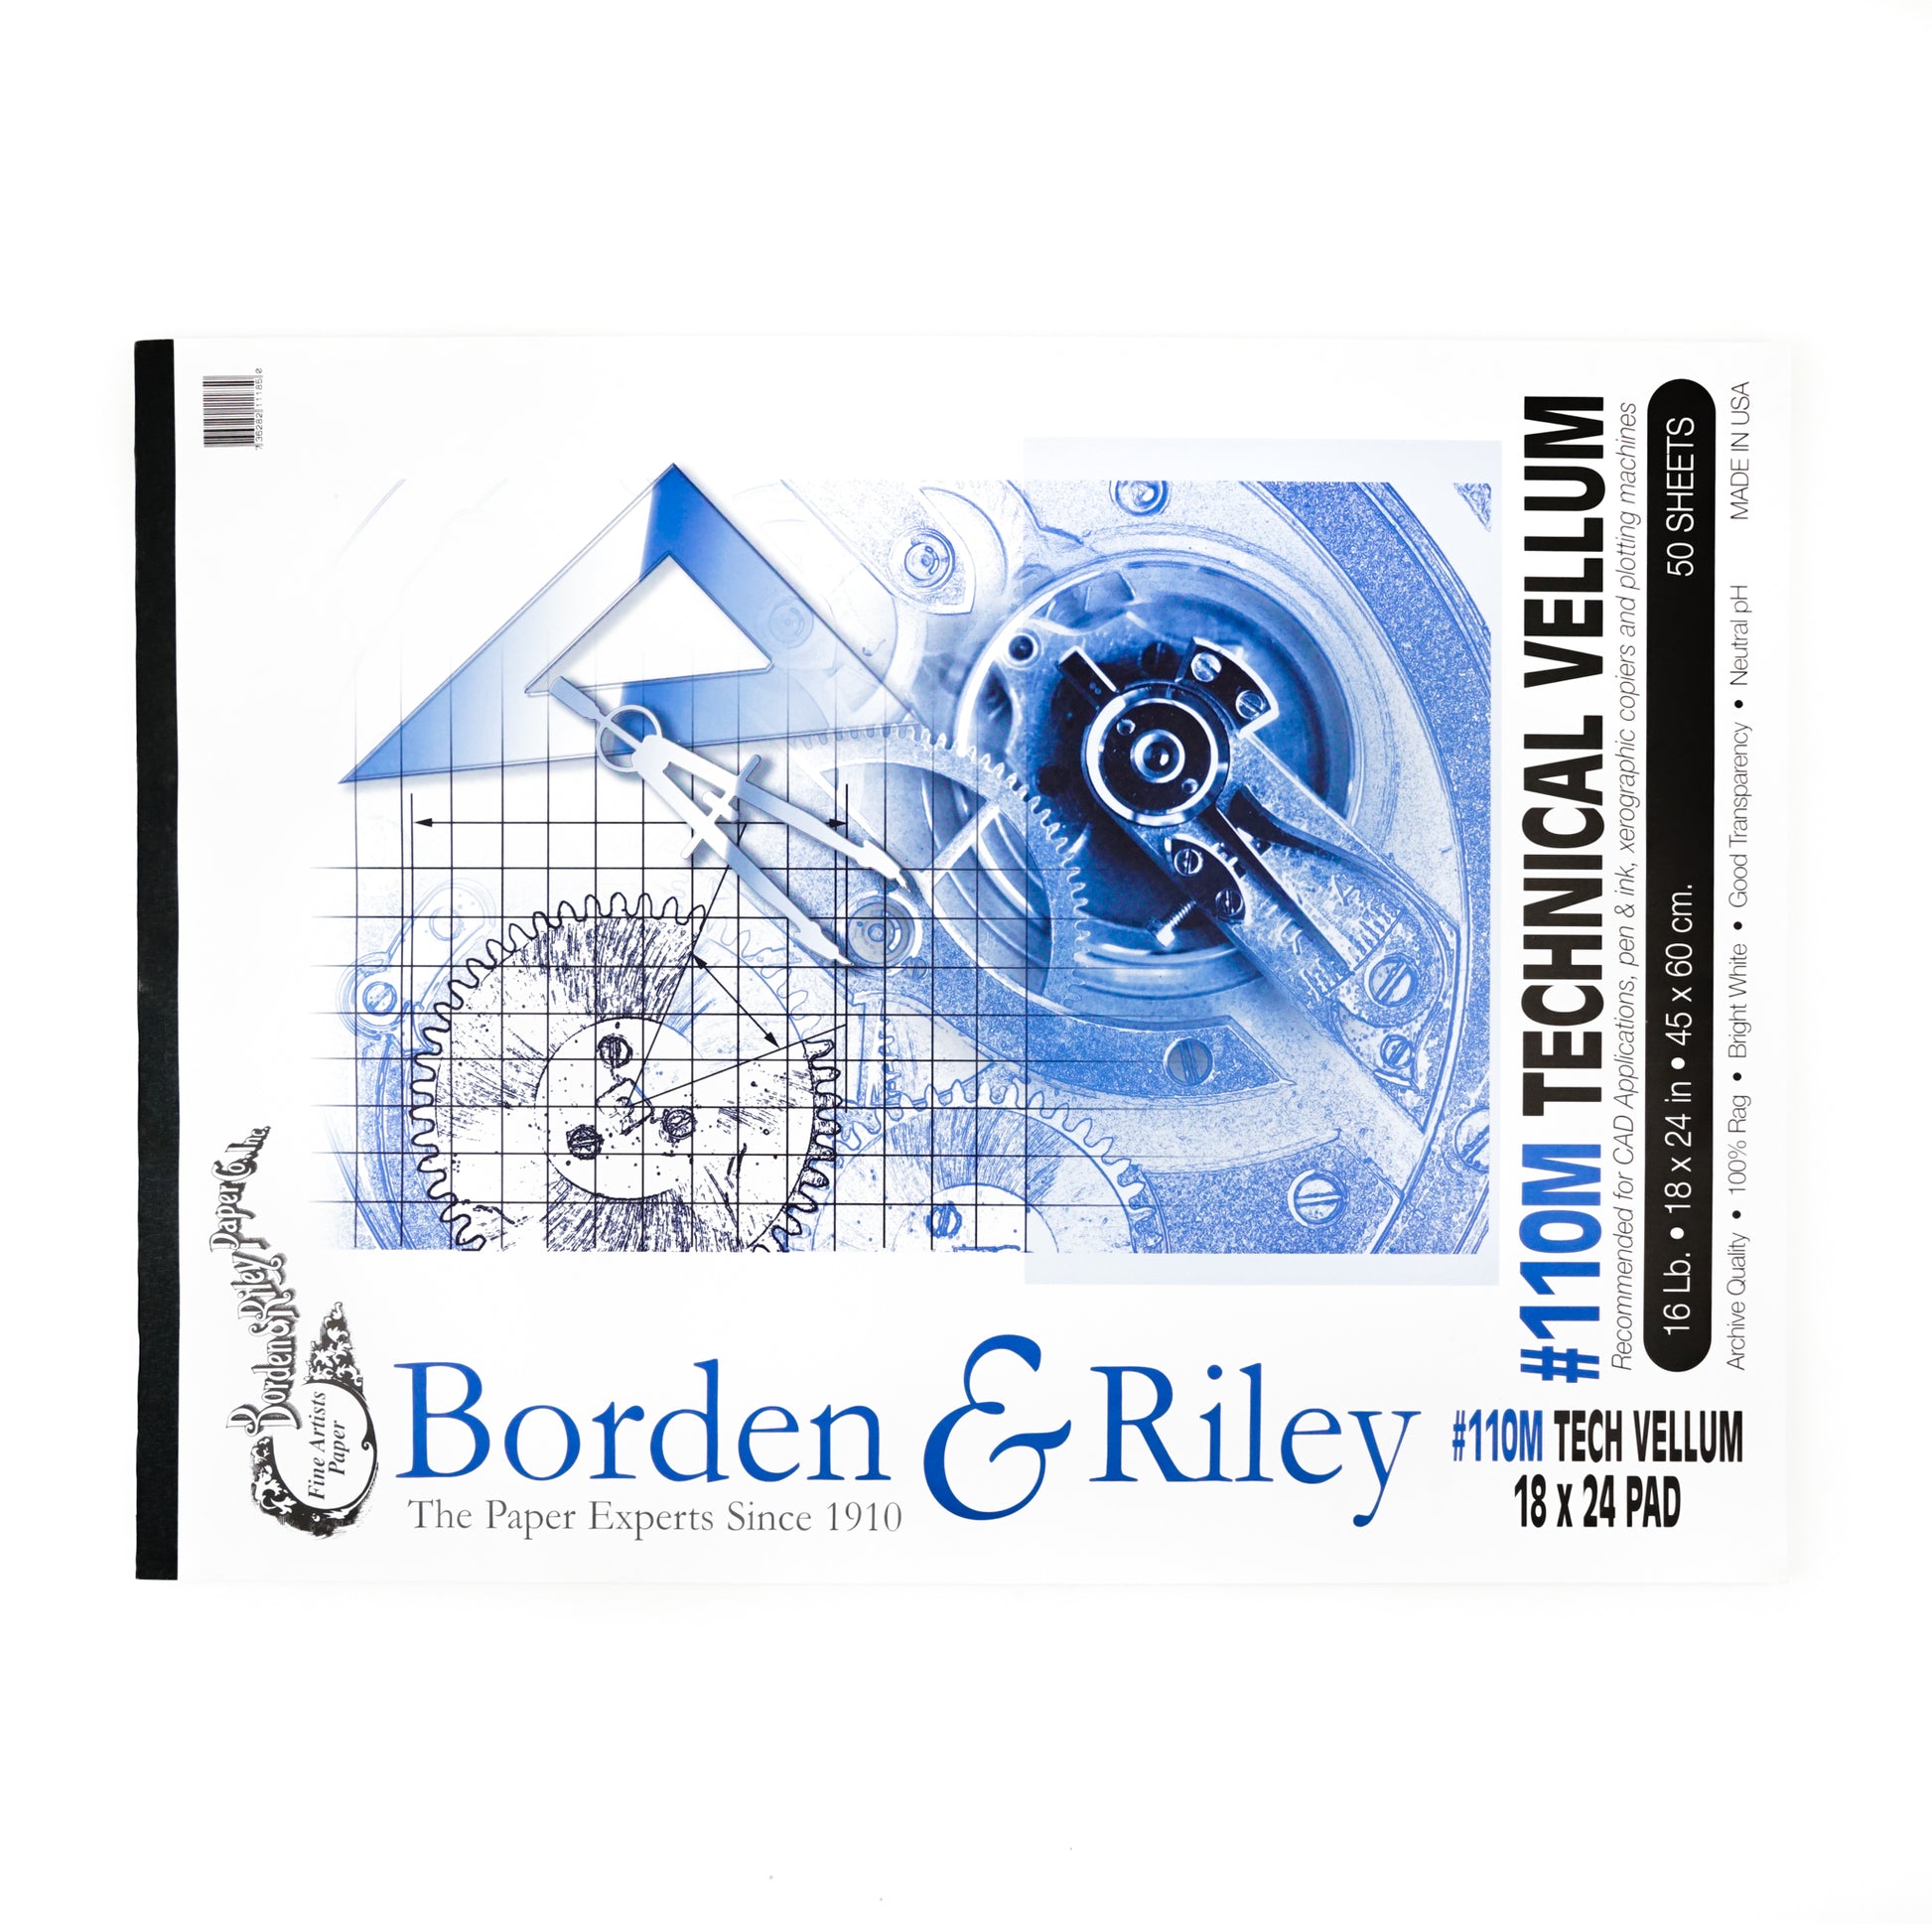 Borden and Riley #110M Technical Vellum Pad - 50 sheets - 18 x 24 inches by Borden and Riley - K. A. Artist Shop